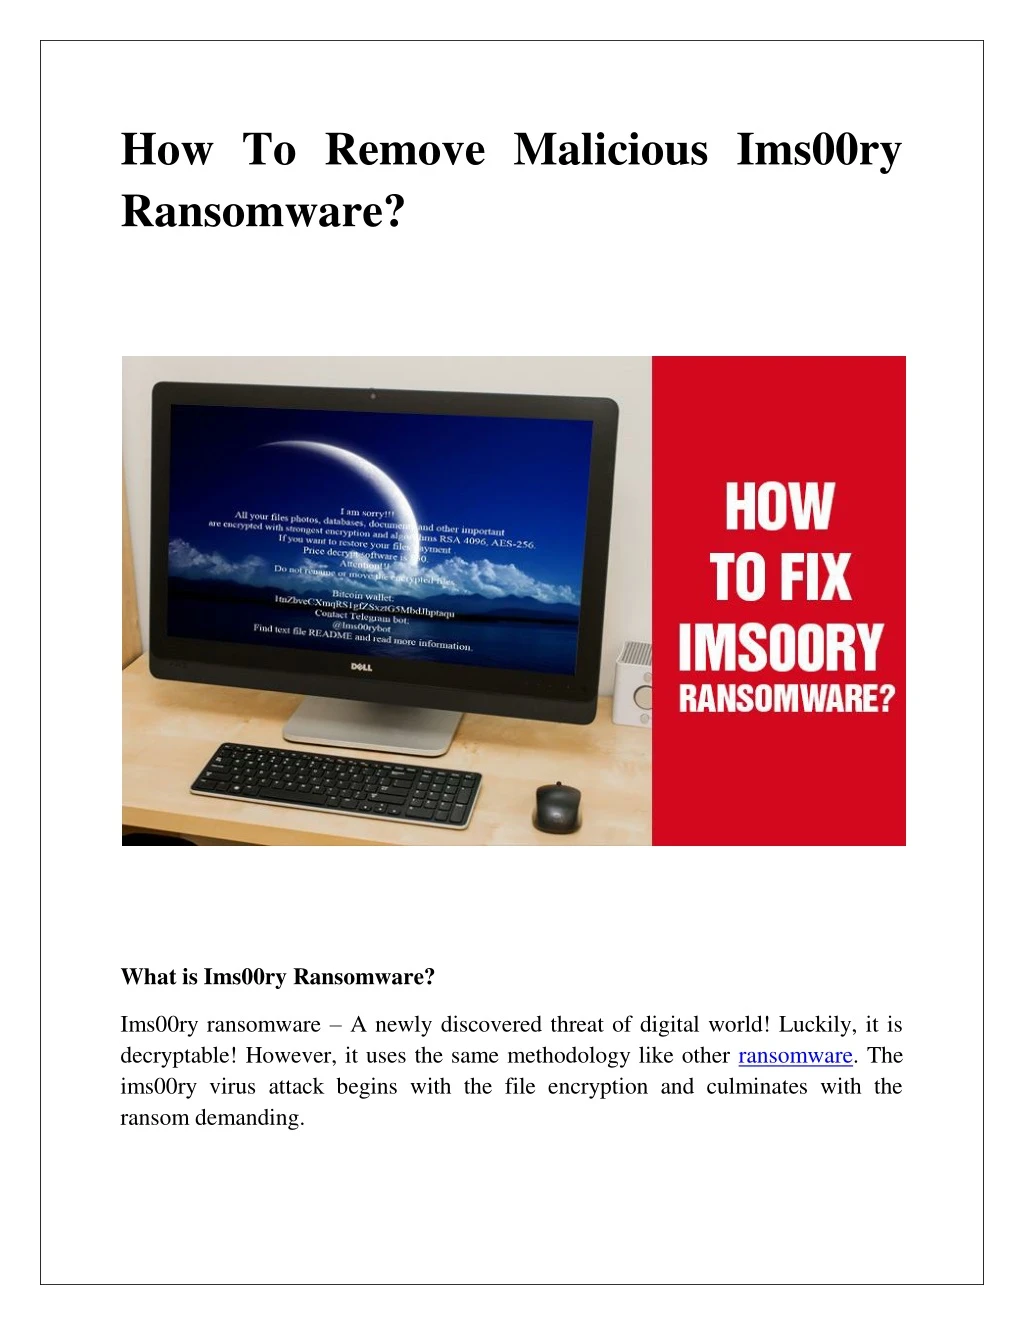 how to remove malicious ims00ry ransomware